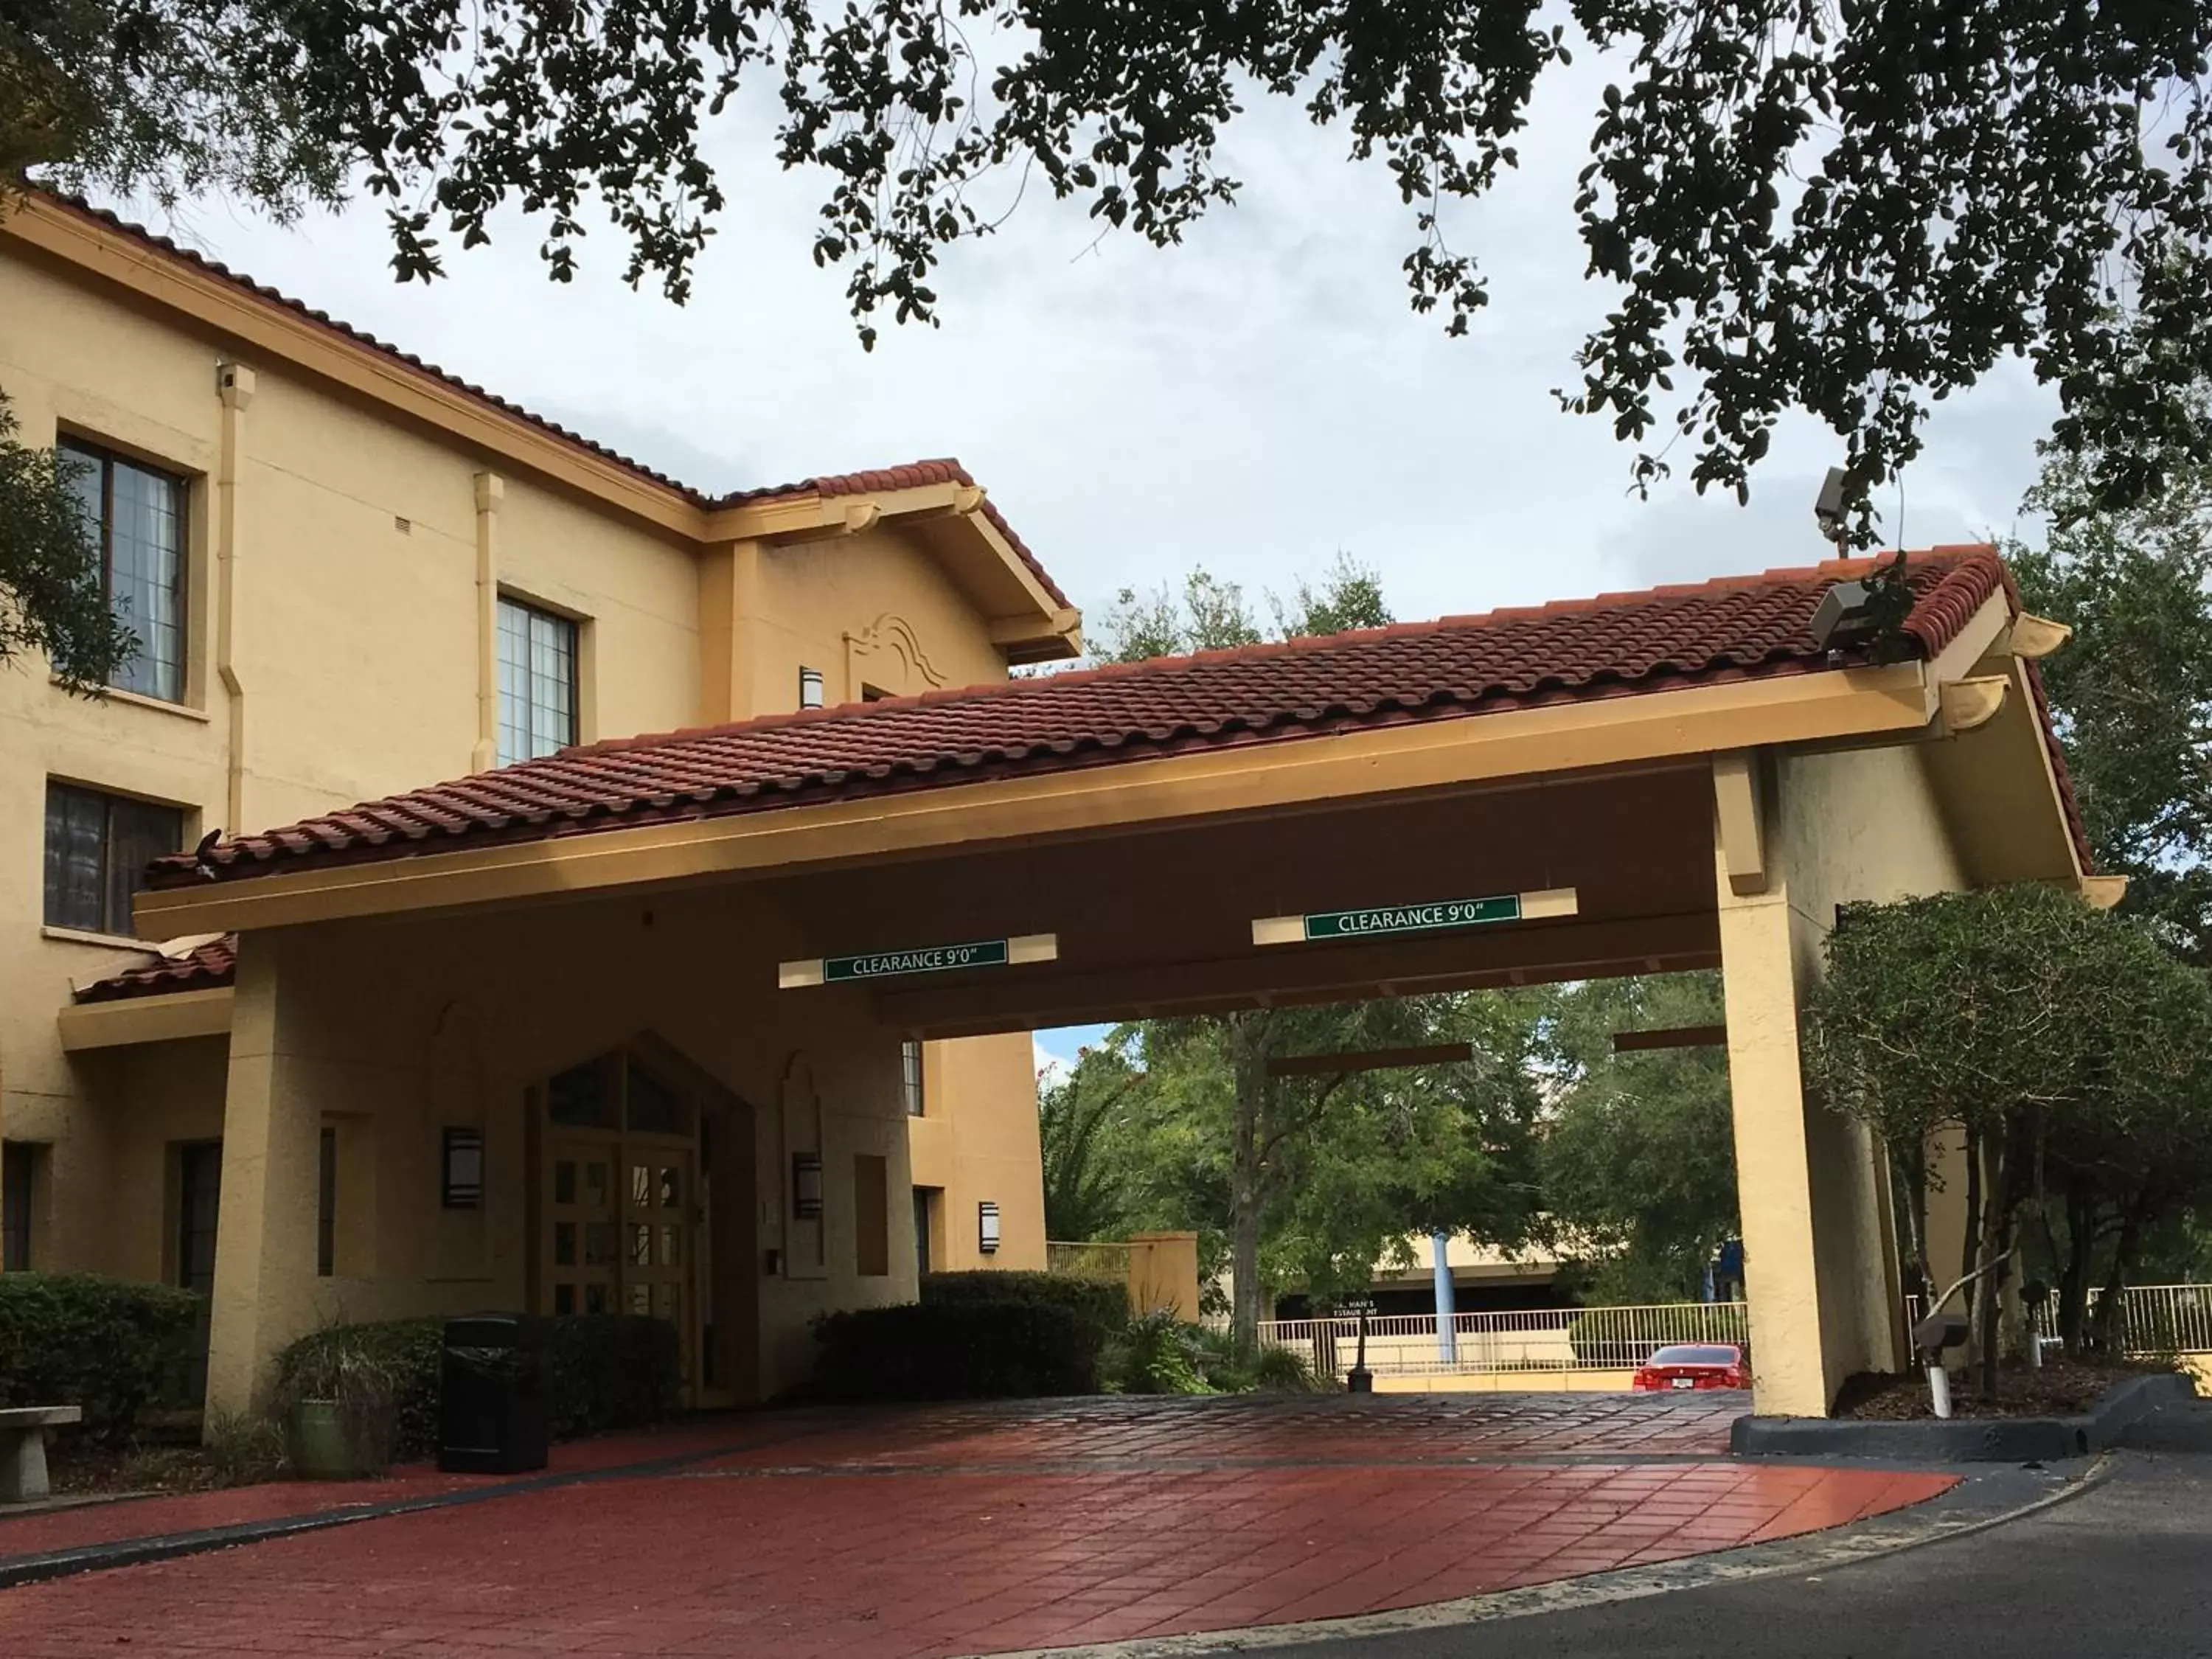 Facade/entrance, Property Building in Days Inn by Wyndham Gainesville Florida